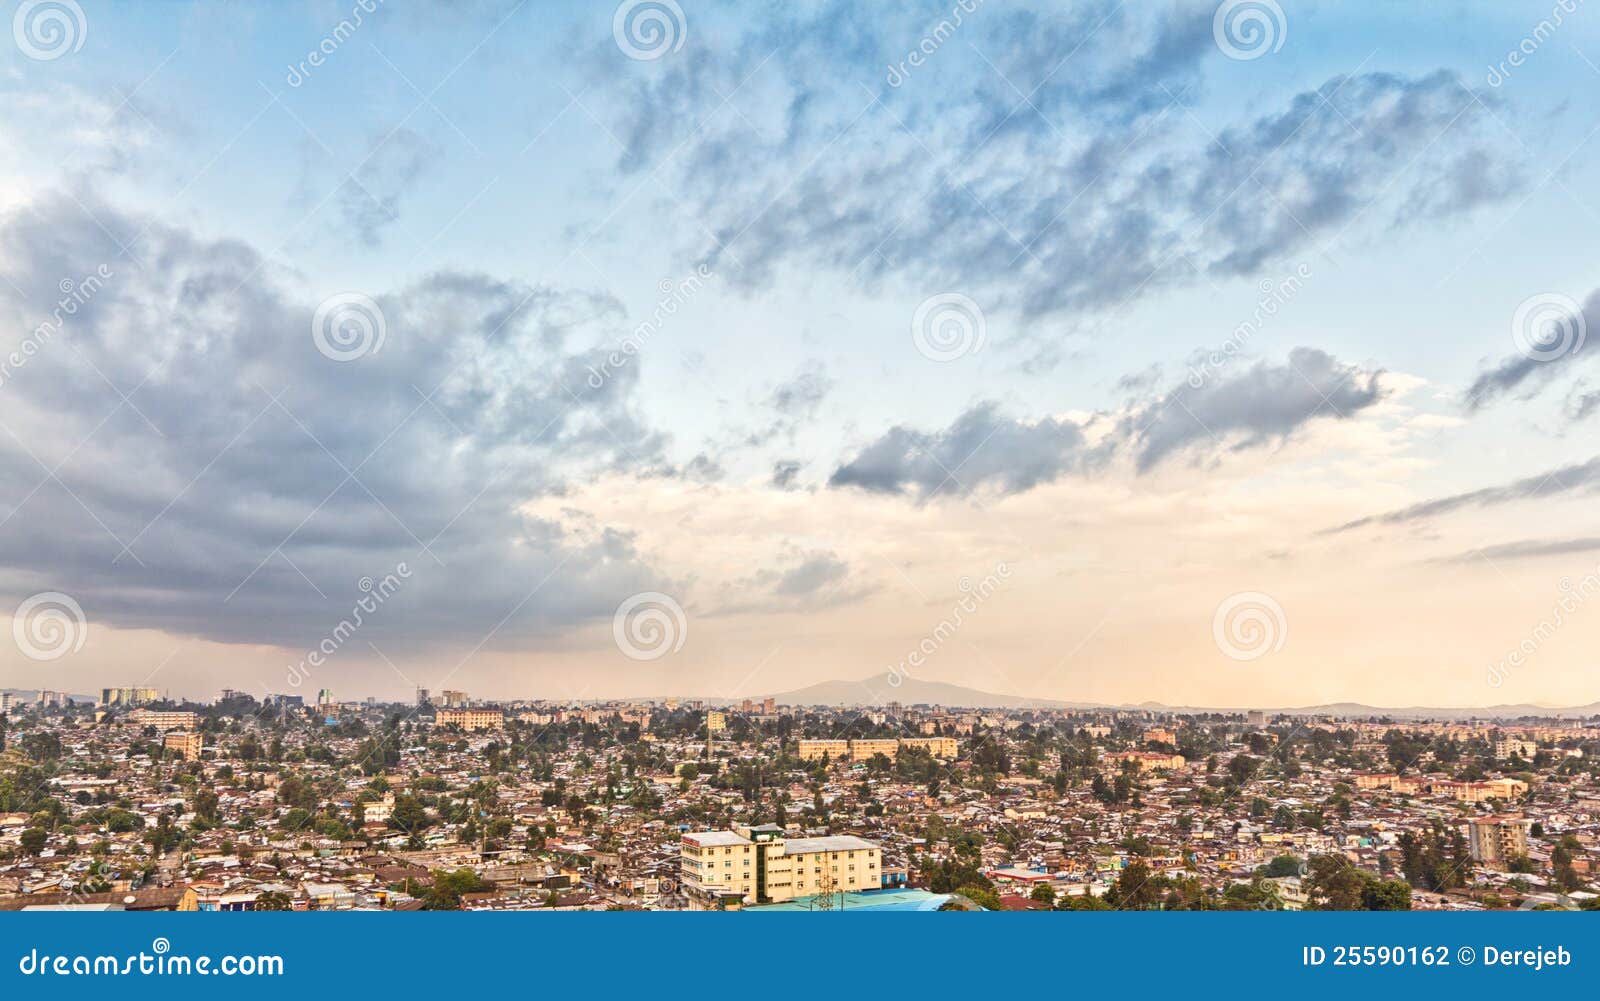 aerial view of addis ababa